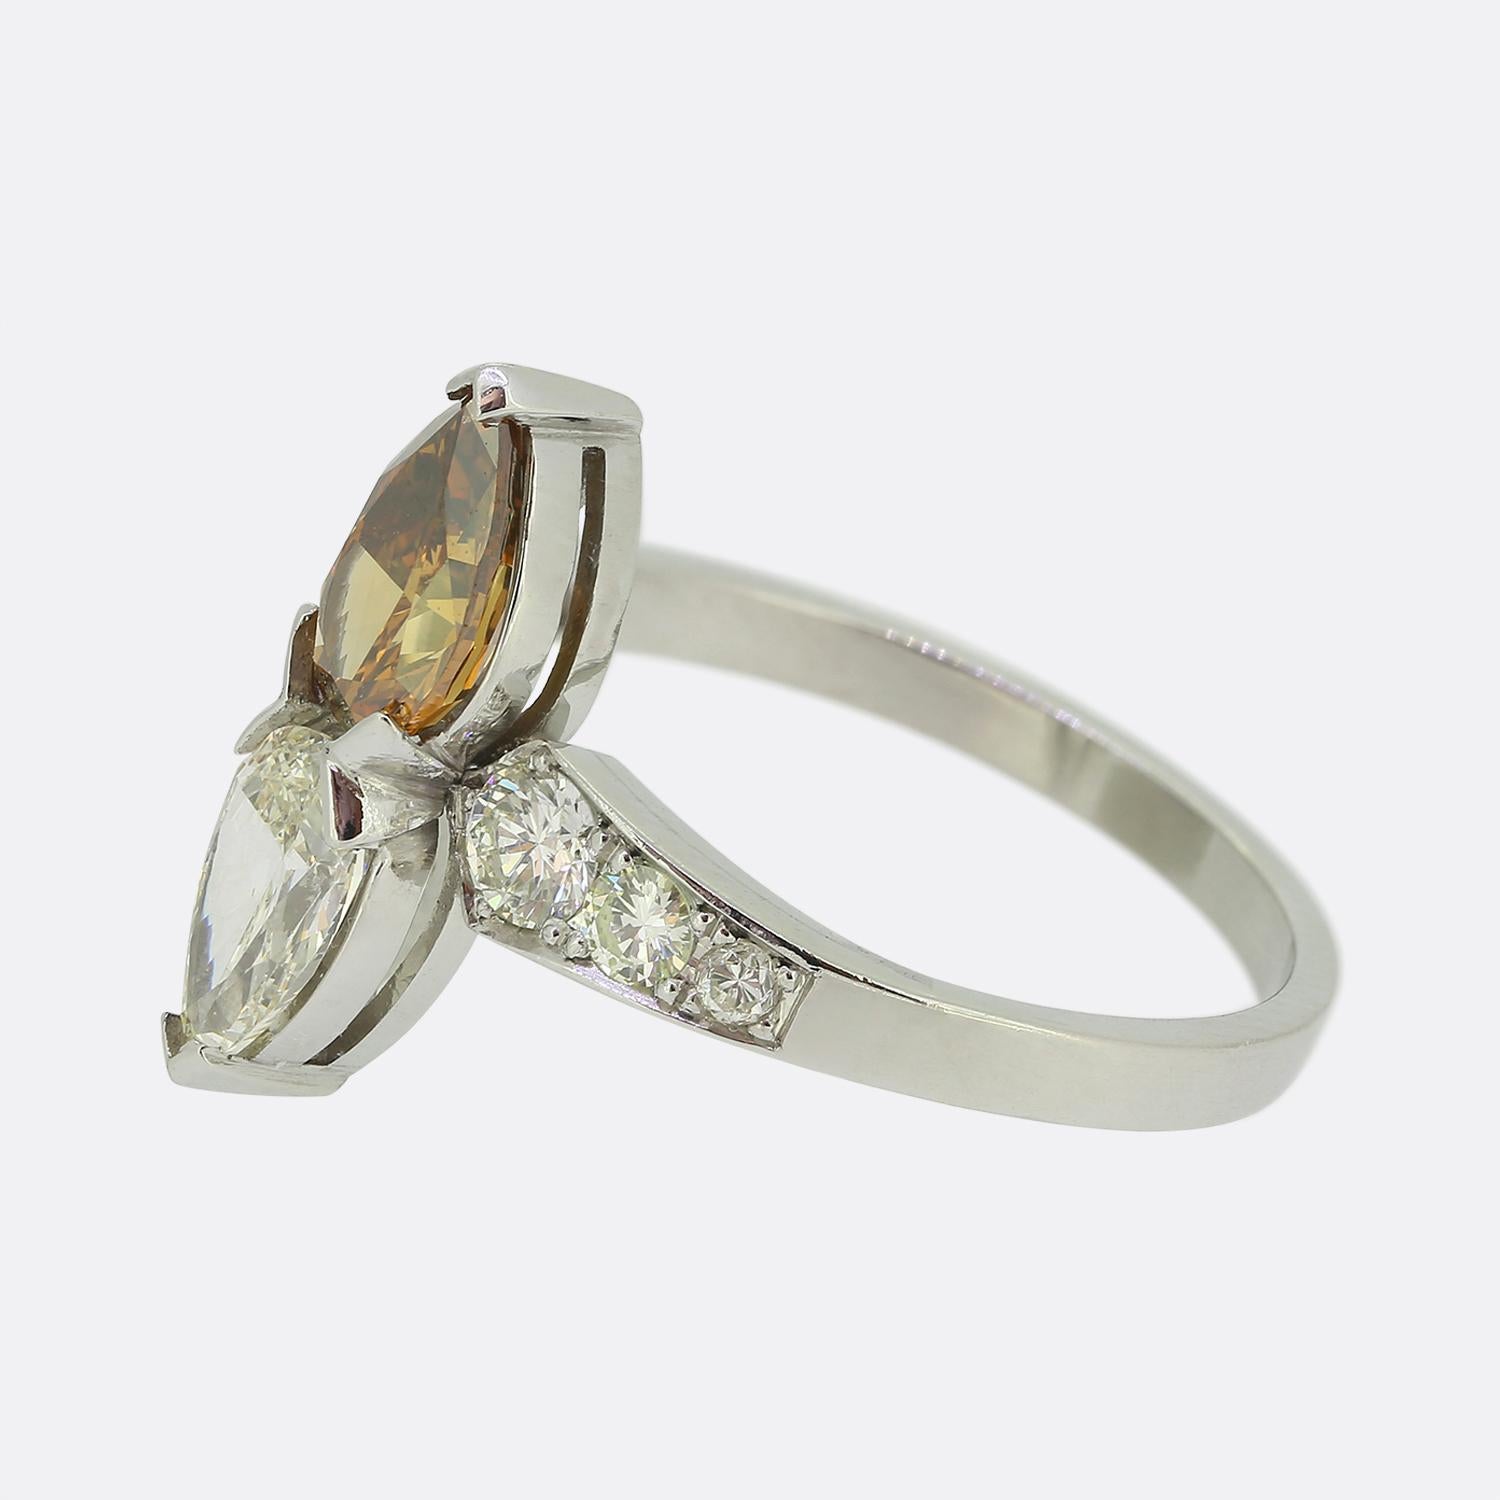 Here we have a beautiful two-stone diamond ring. This vintage piece features a duo of pair cut diamonds at the face; one fancy orange brown colour and the other white with a yellow tint. These radiant focal stones are then flanked and accentuated by